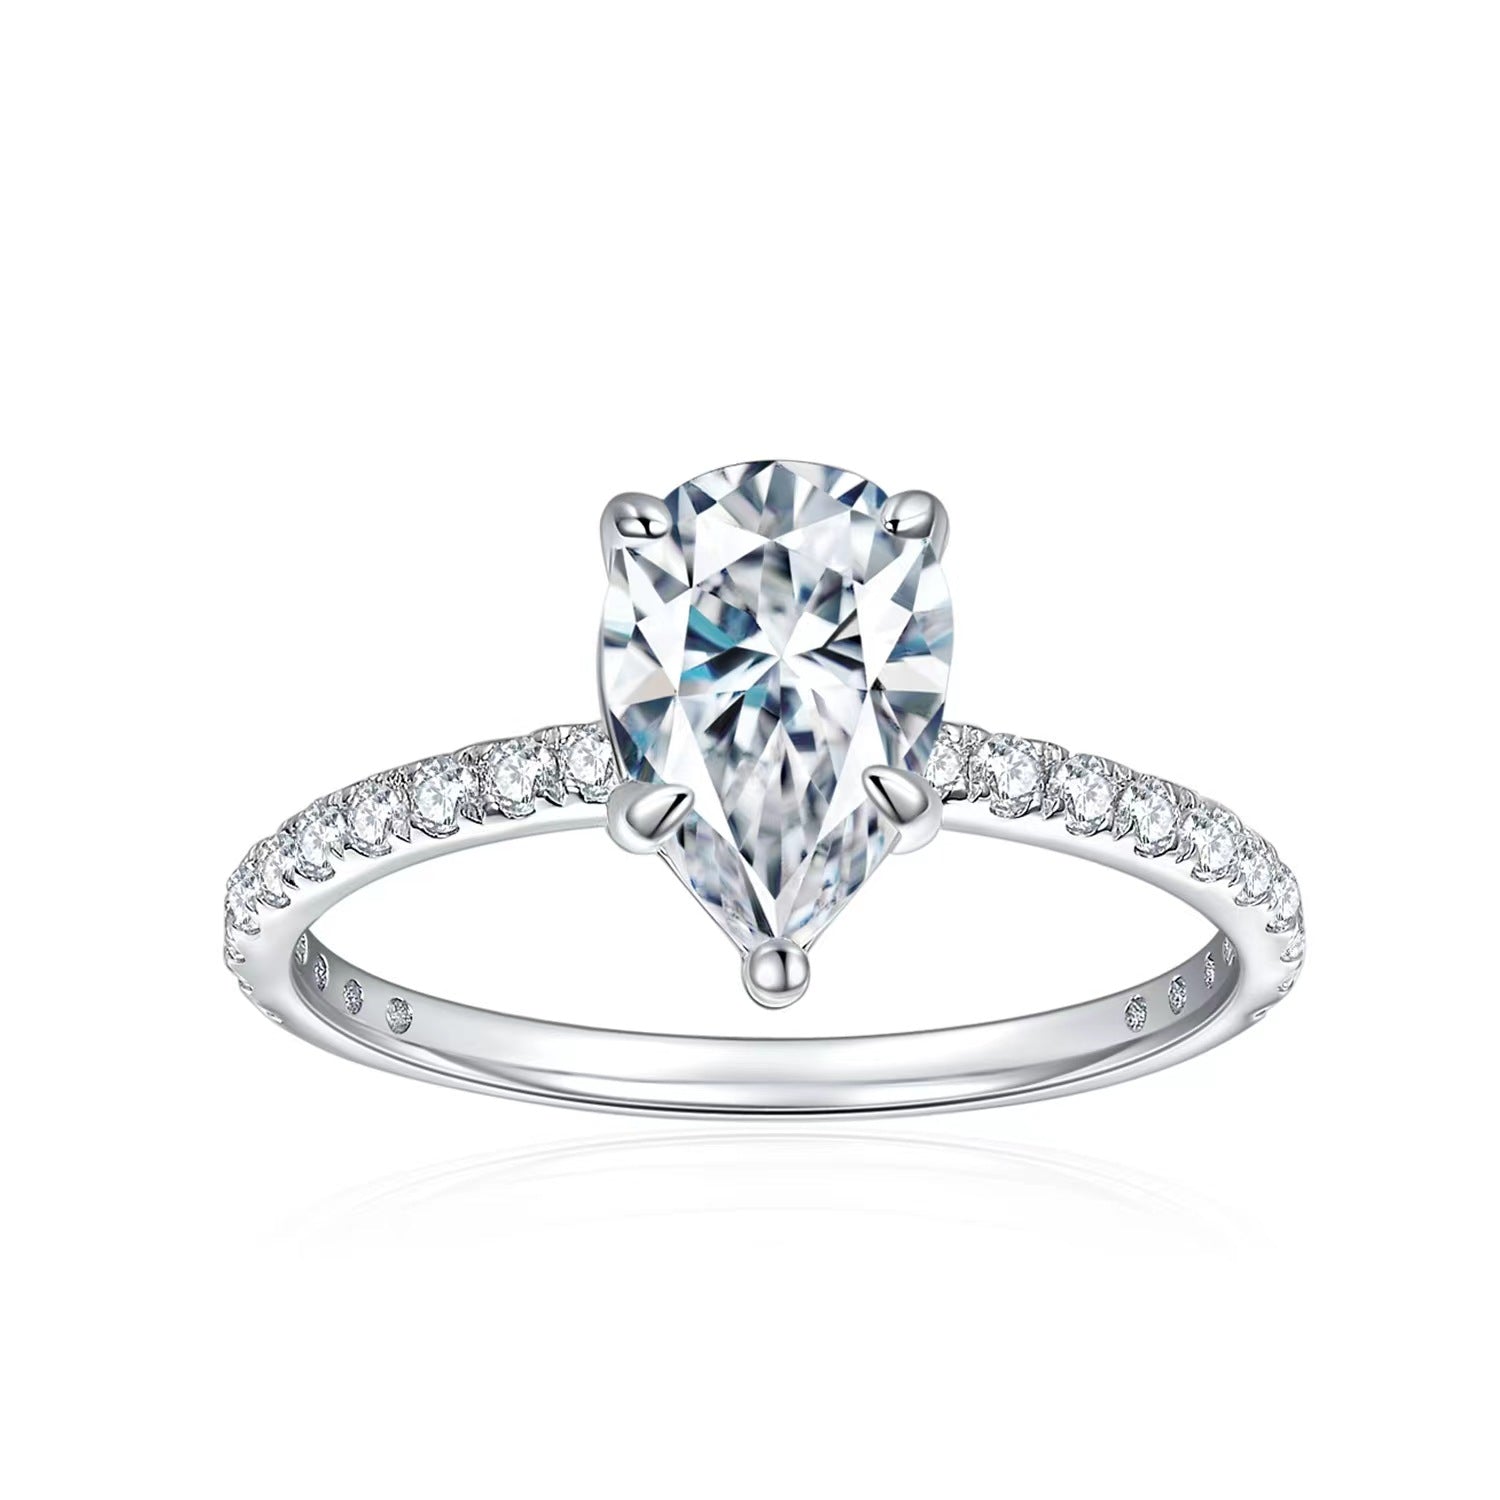 "Raindrop" Solitaire 1.5ct/2ct Pear Cut Moissanite Engagement Ring